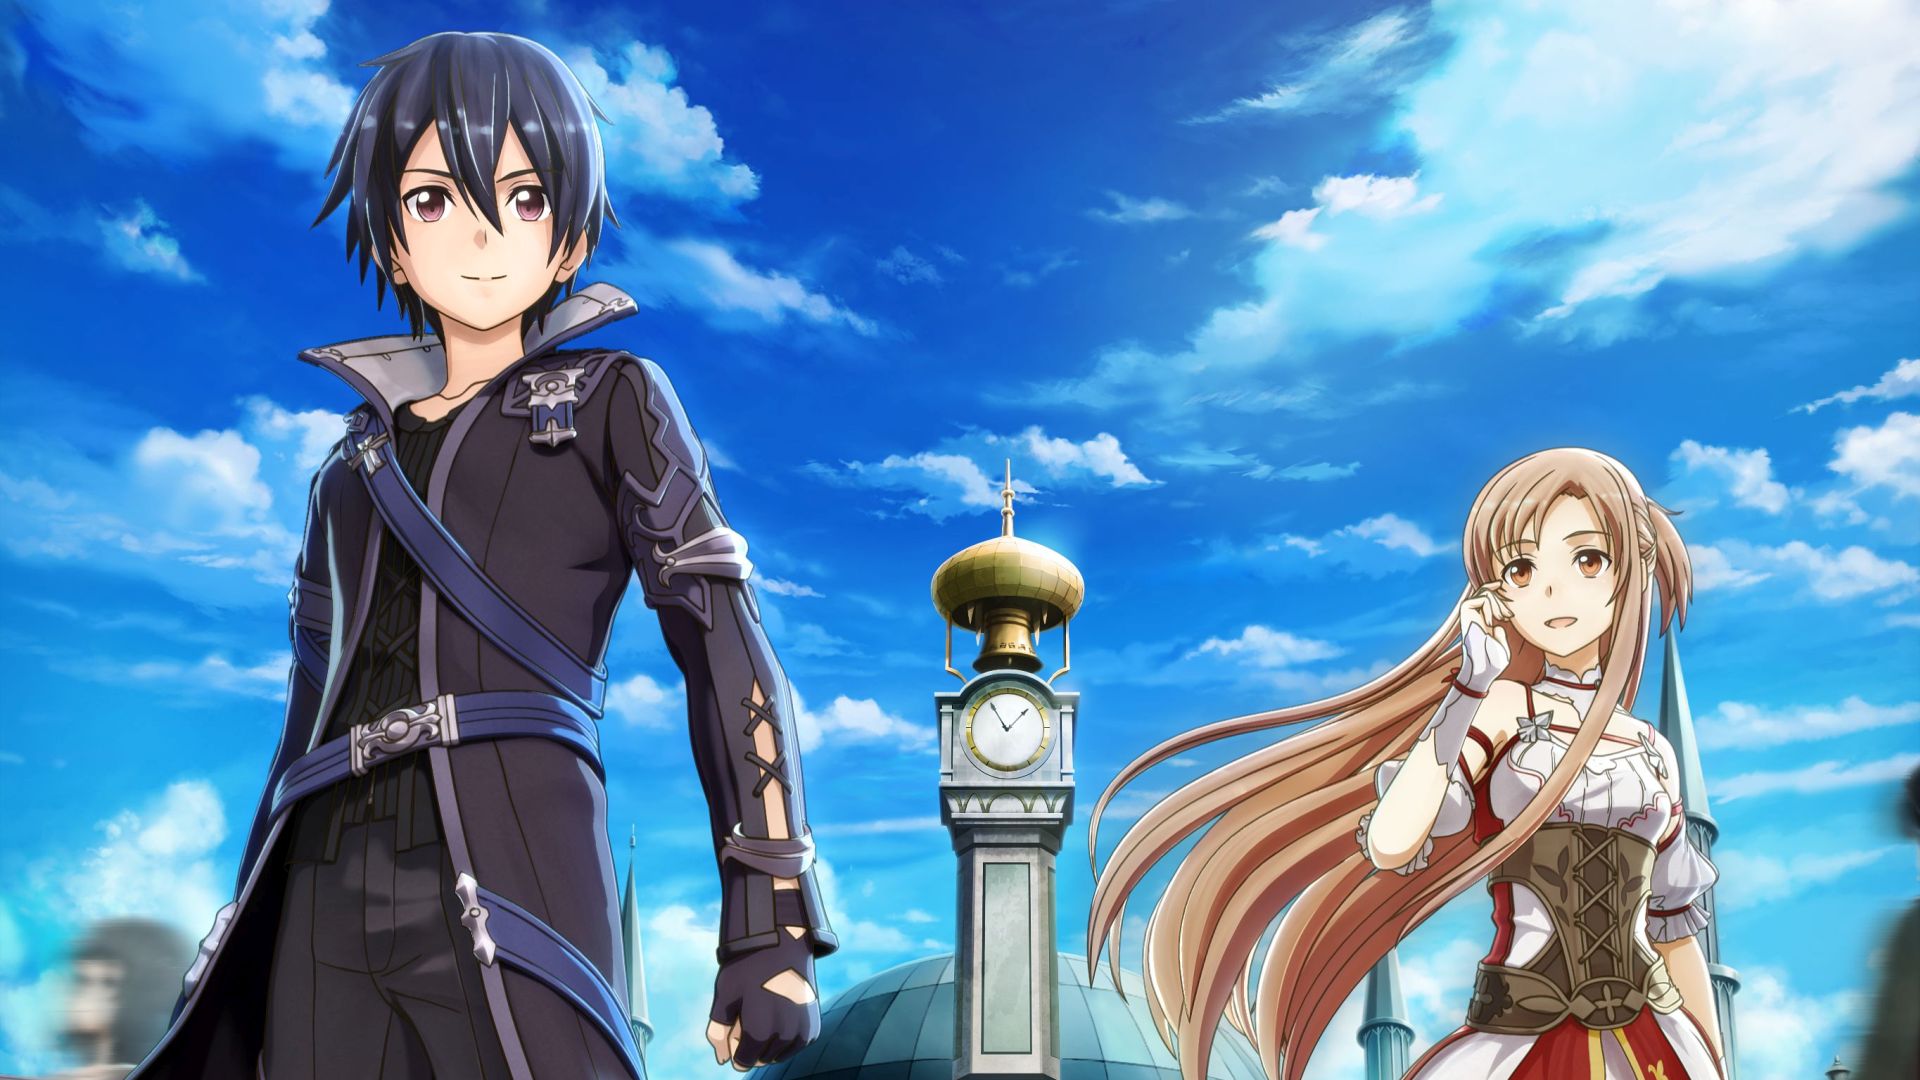 Sword Art Online's New VR Game Is Not What We Wanted